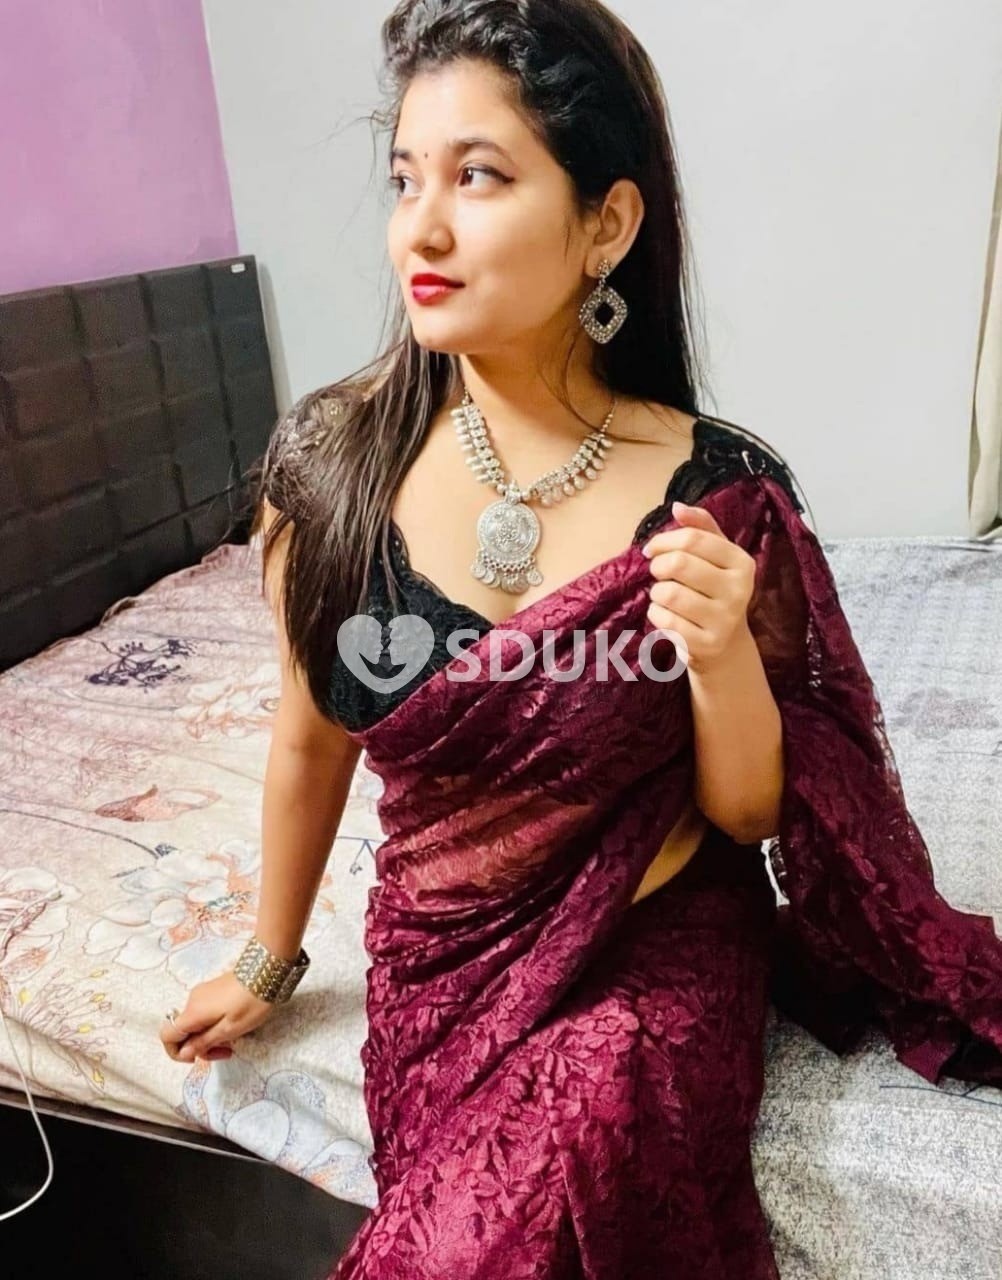 HYDERABAD NEAR BY AREA AVAILABLE BEST, 💯 SAFE AND, GENINUE VIP LOW BUDGET CALL GIRL CALL ME